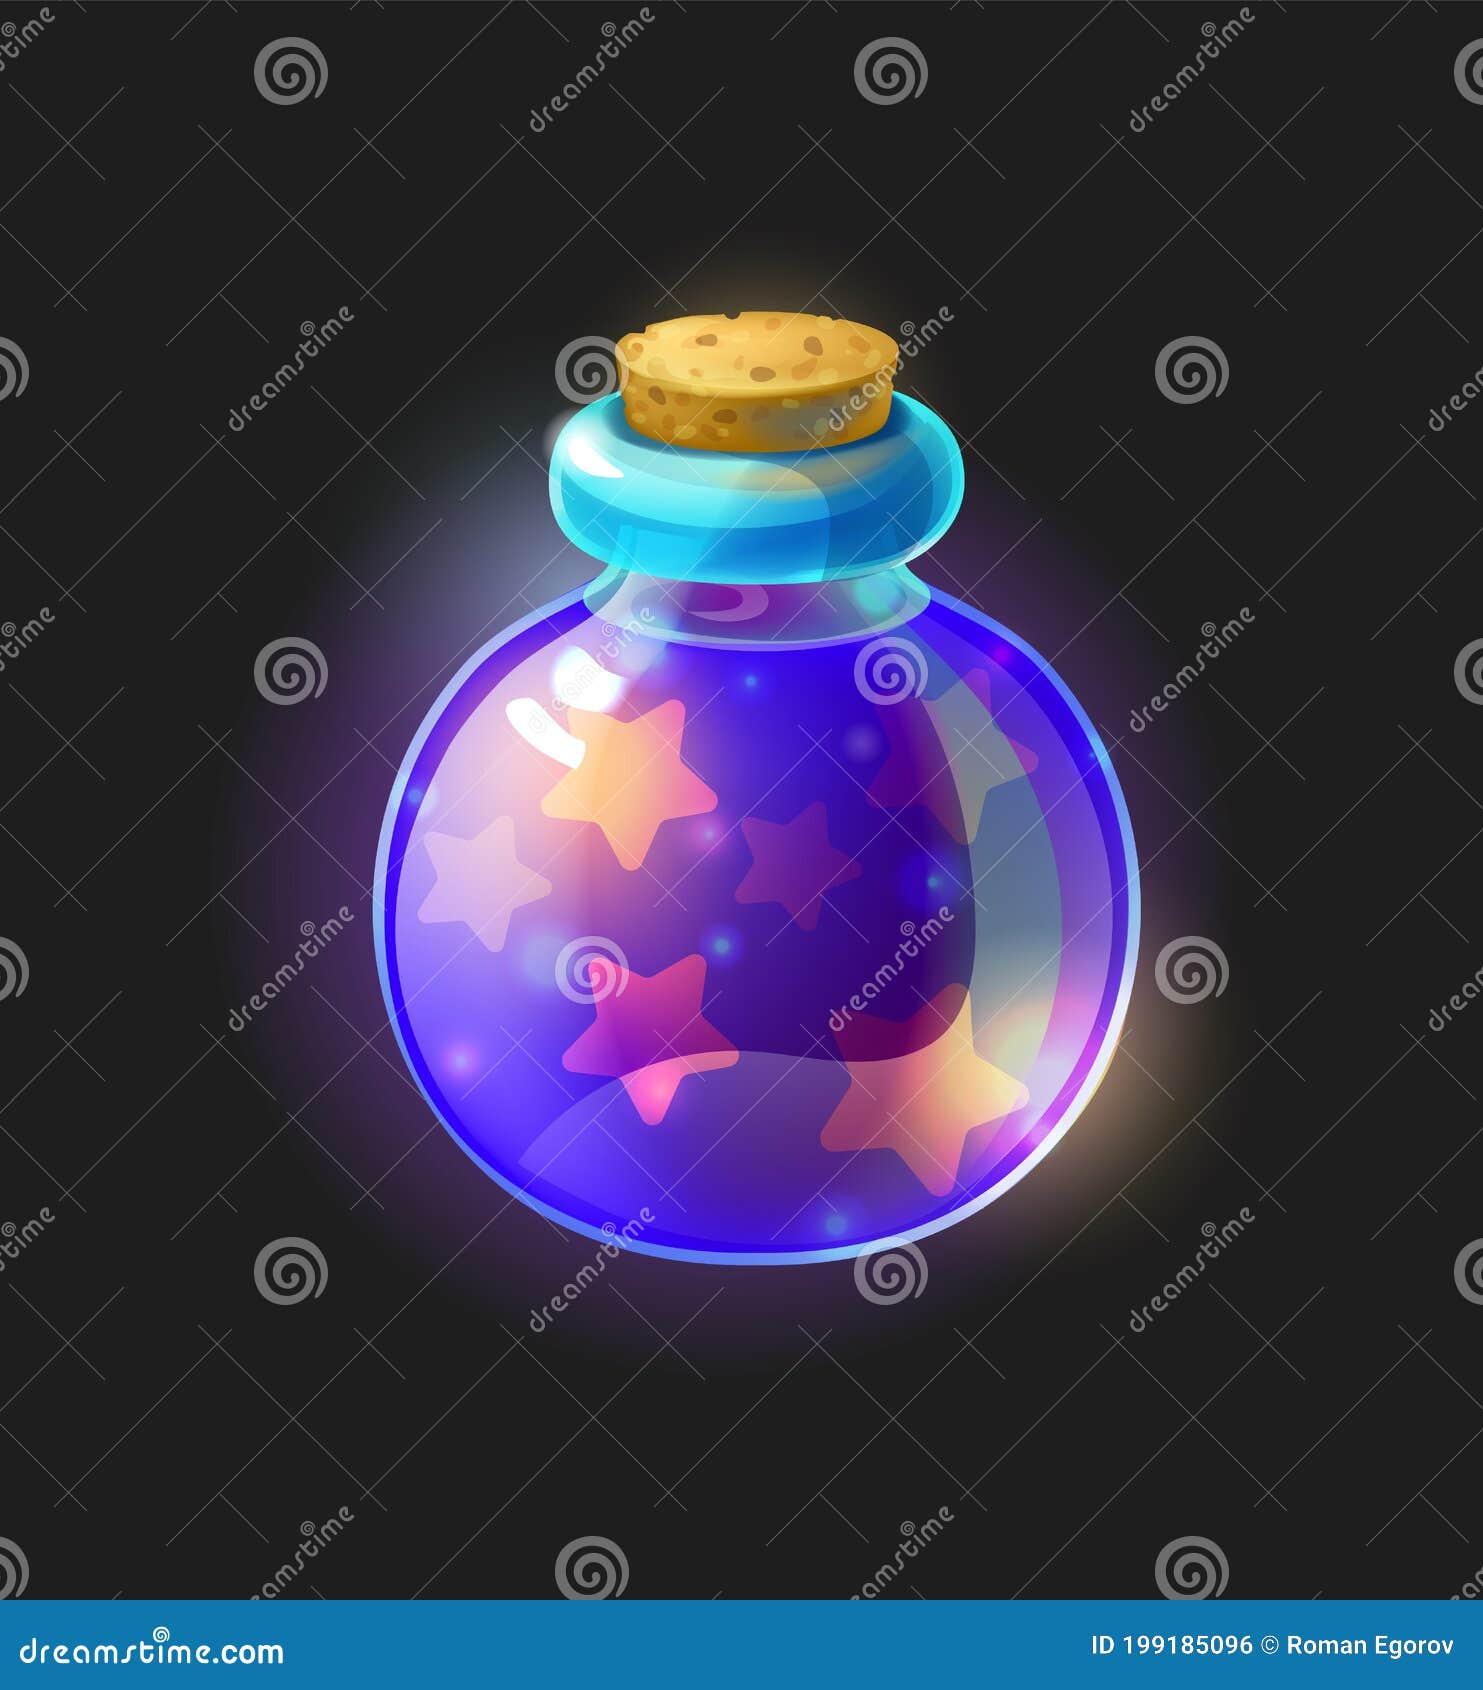 magic potion. violet substance in closed tube, round form phial with star shining liquid. computer video game wizardry